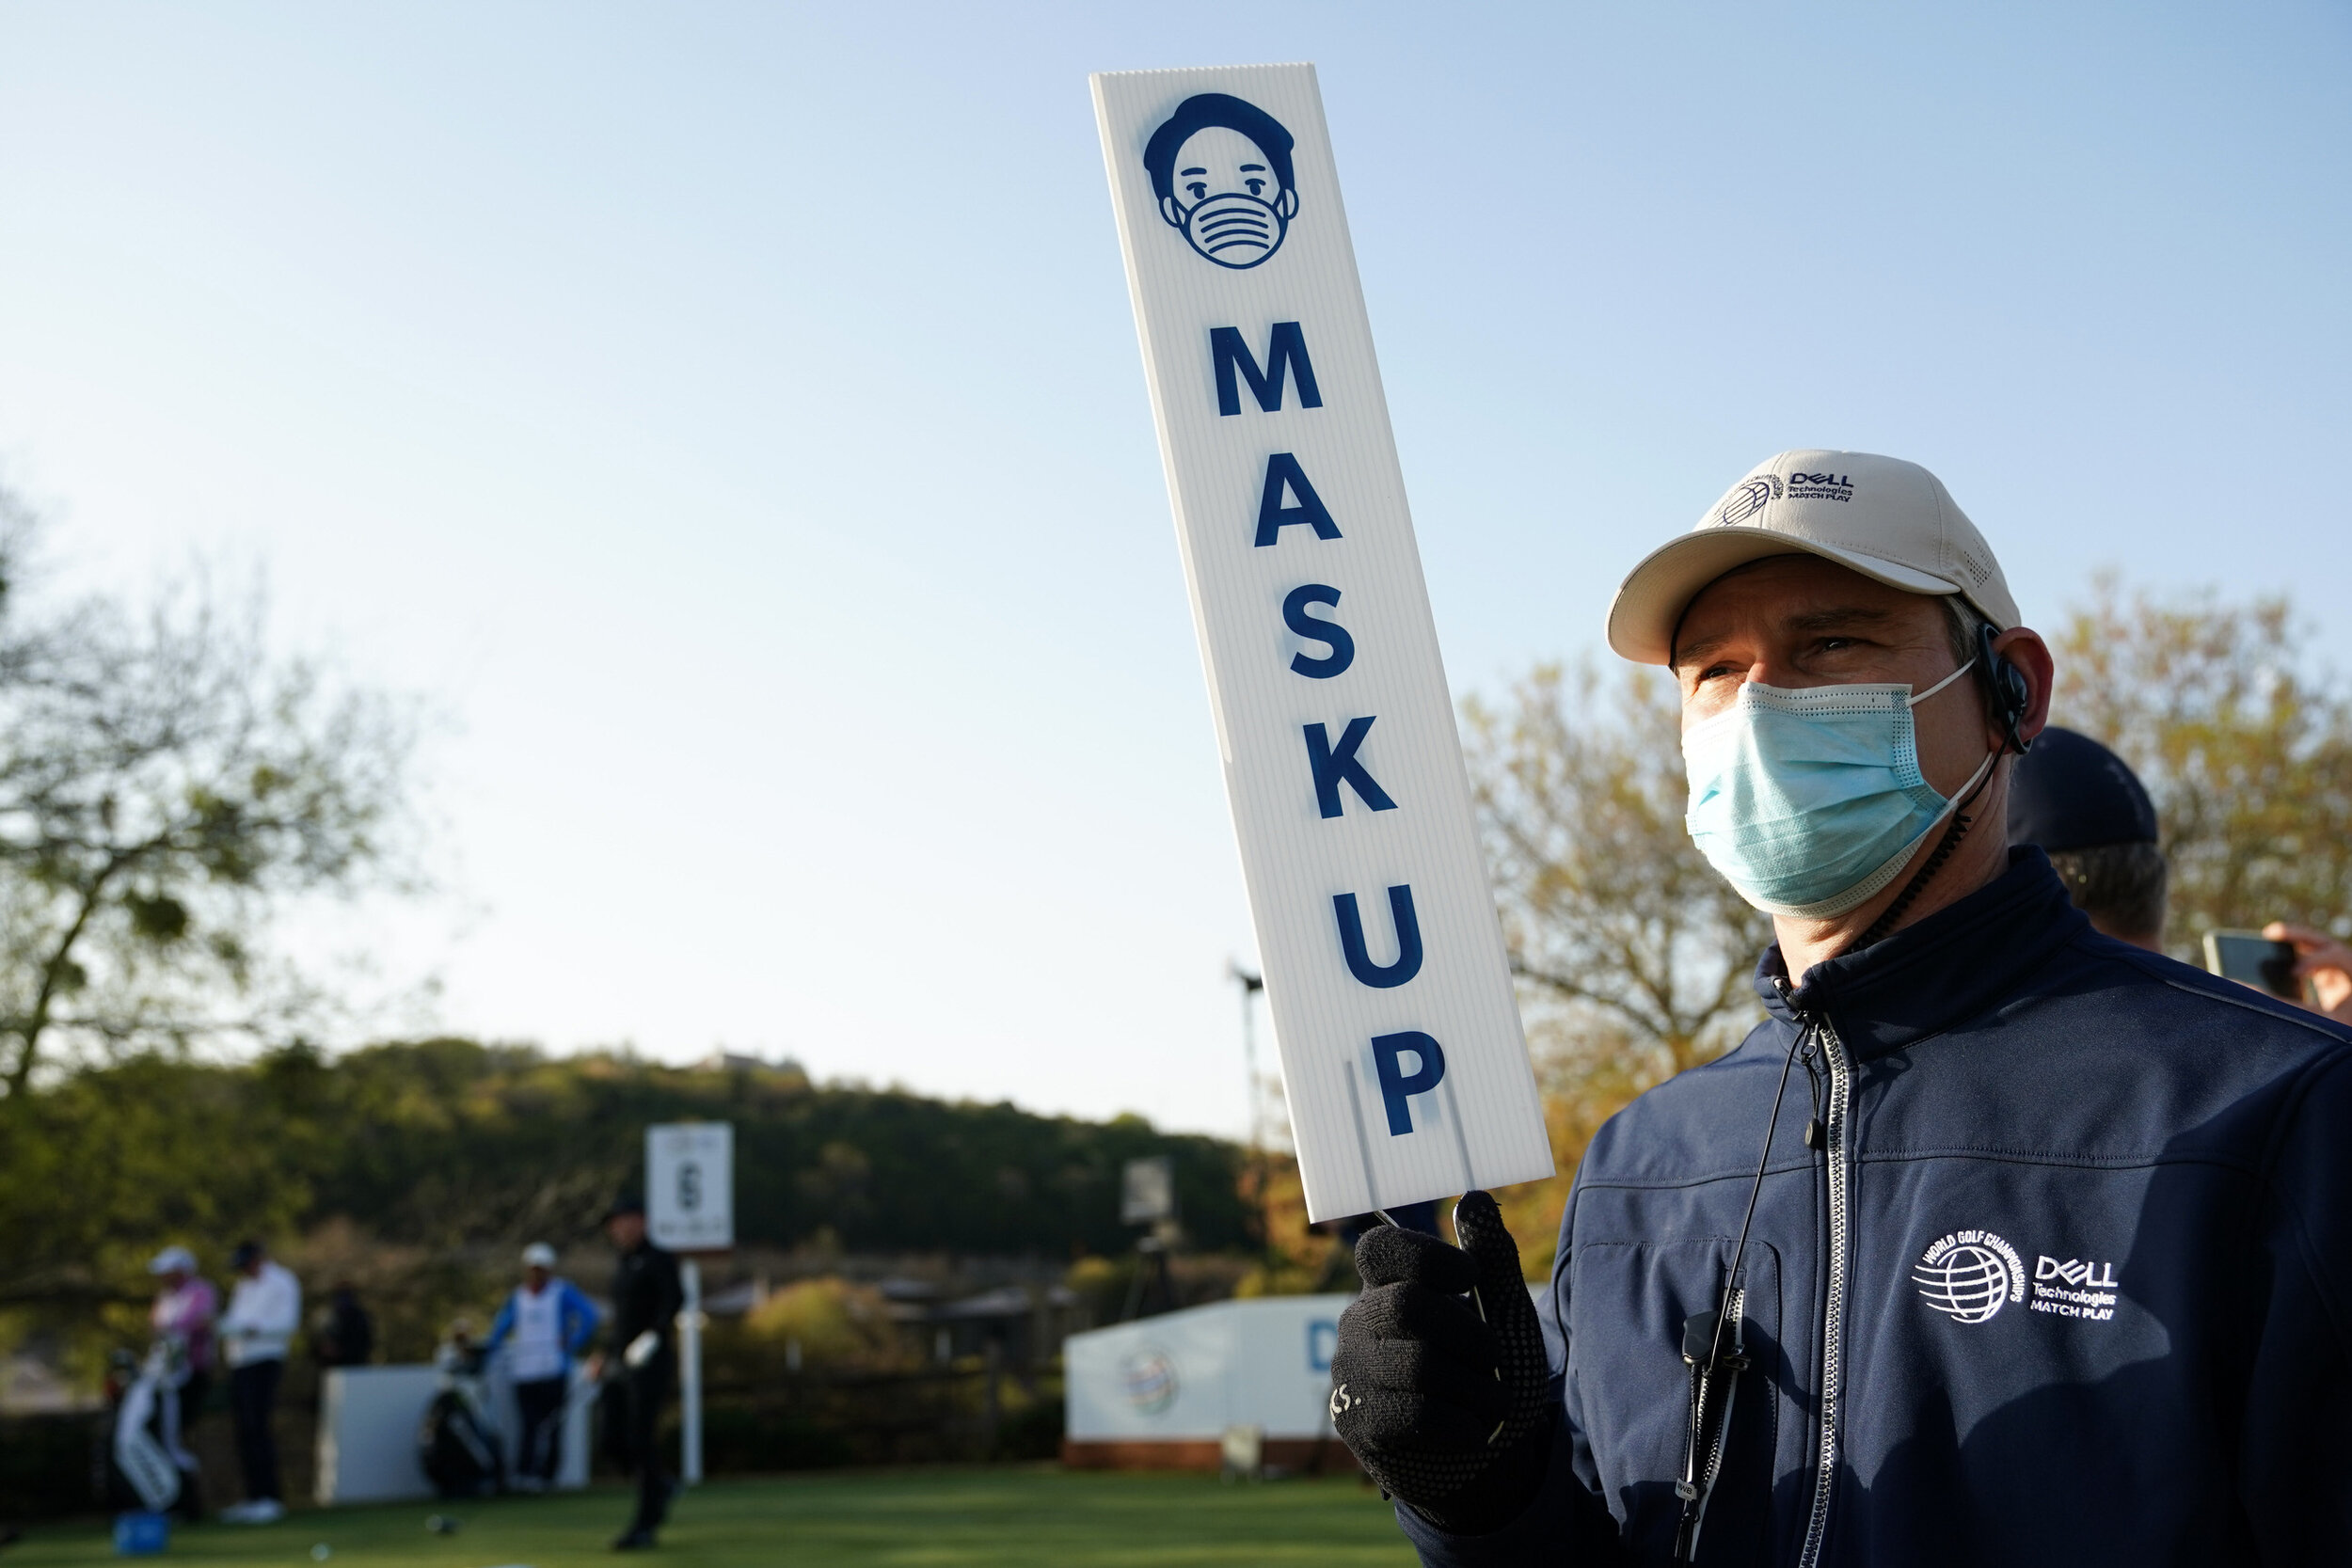  AUSTIN, TEXAS - MARCH 24: A tournament official holds up a "mask up" sign on the sixth hole during the first round of the World Golf Championships-Dell Technologies Match Play at Austin Country Club on March 24, 2021 in Austin, Texas. (Photo by Darr